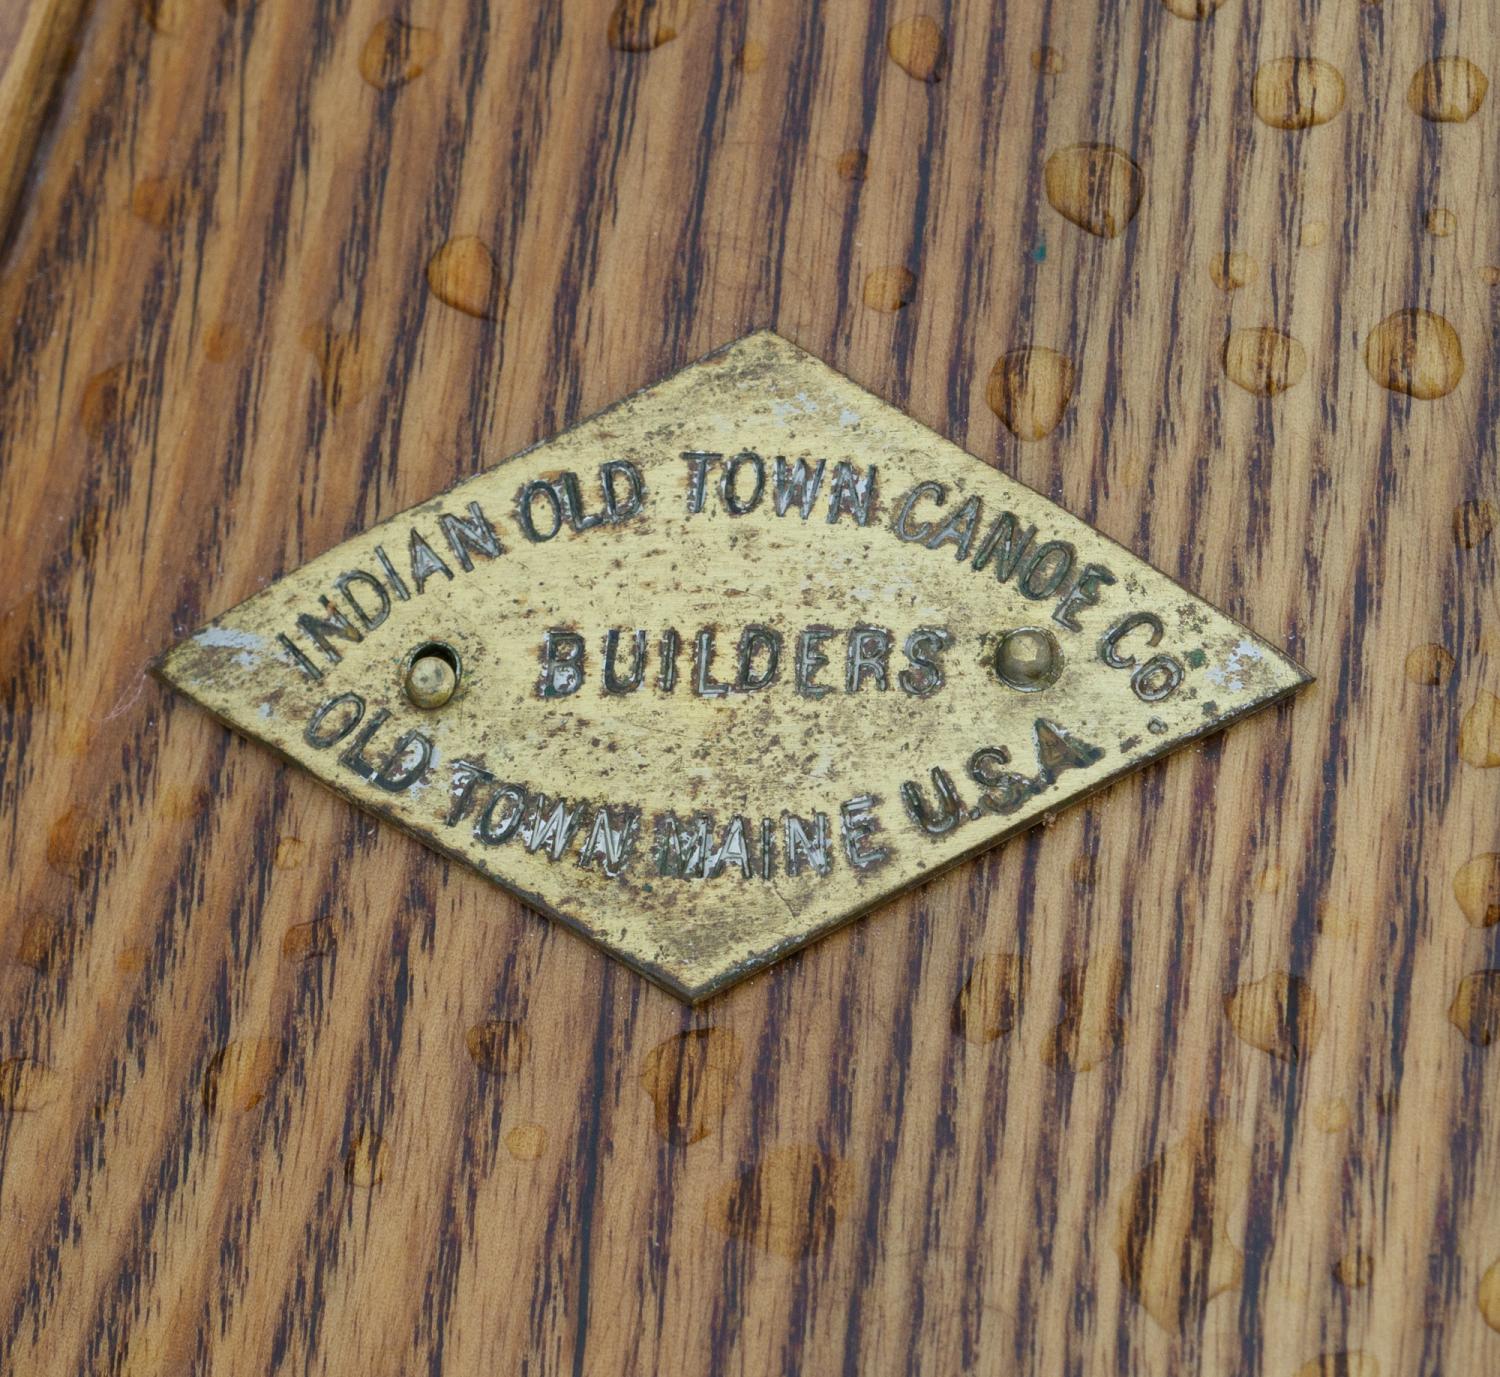 Indian Old Town tag